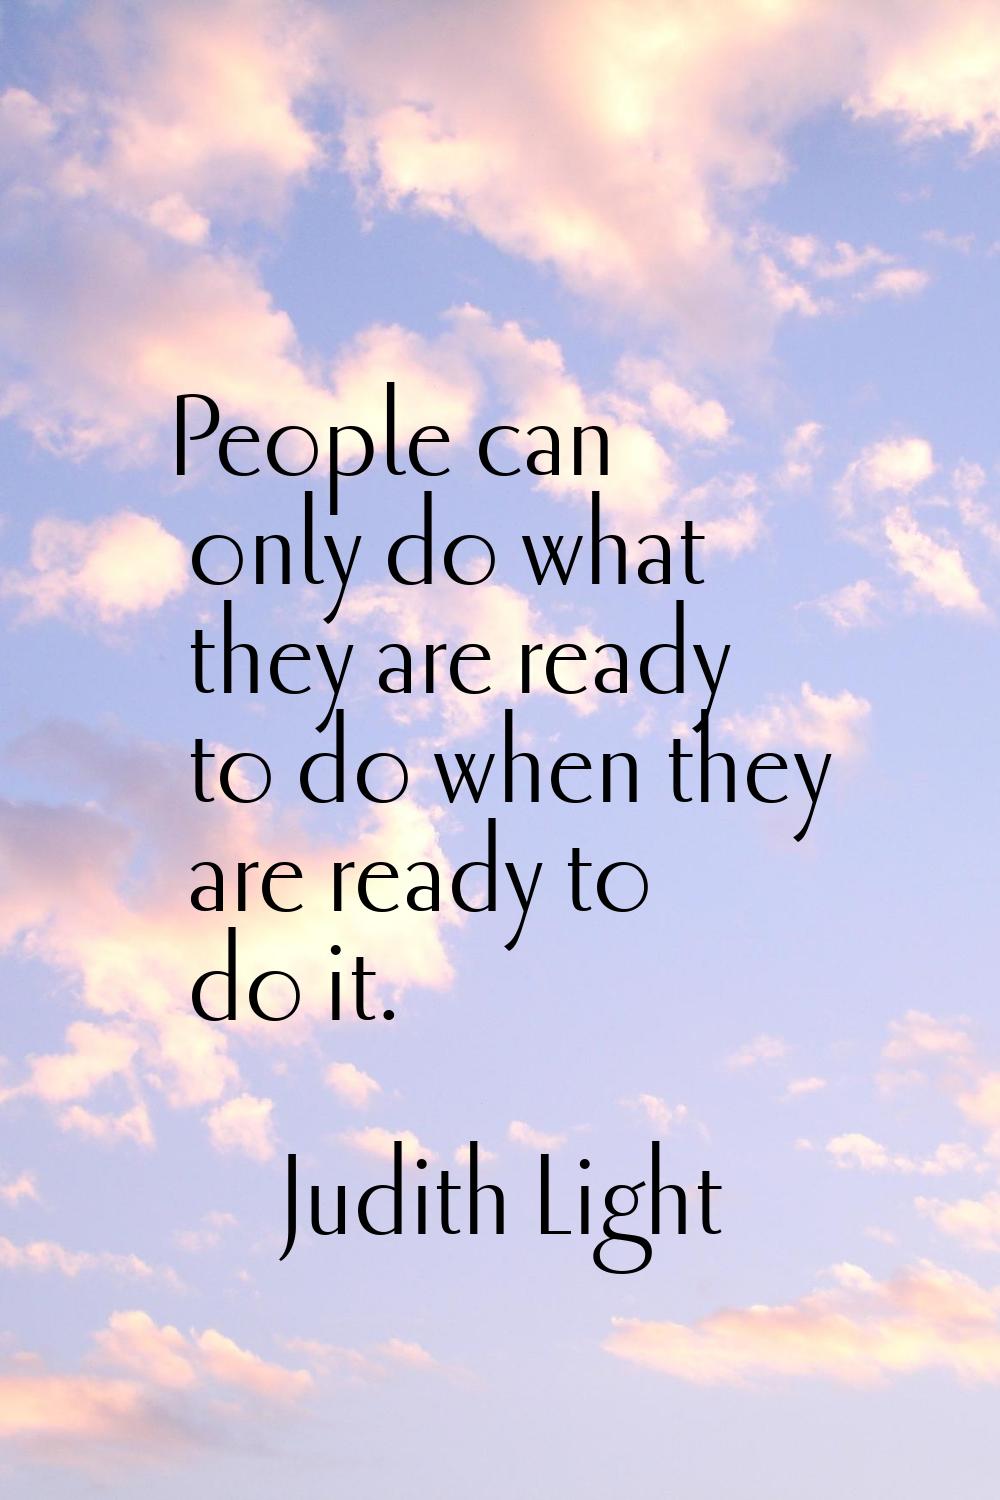 People can only do what they are ready to do when they are ready to do it.